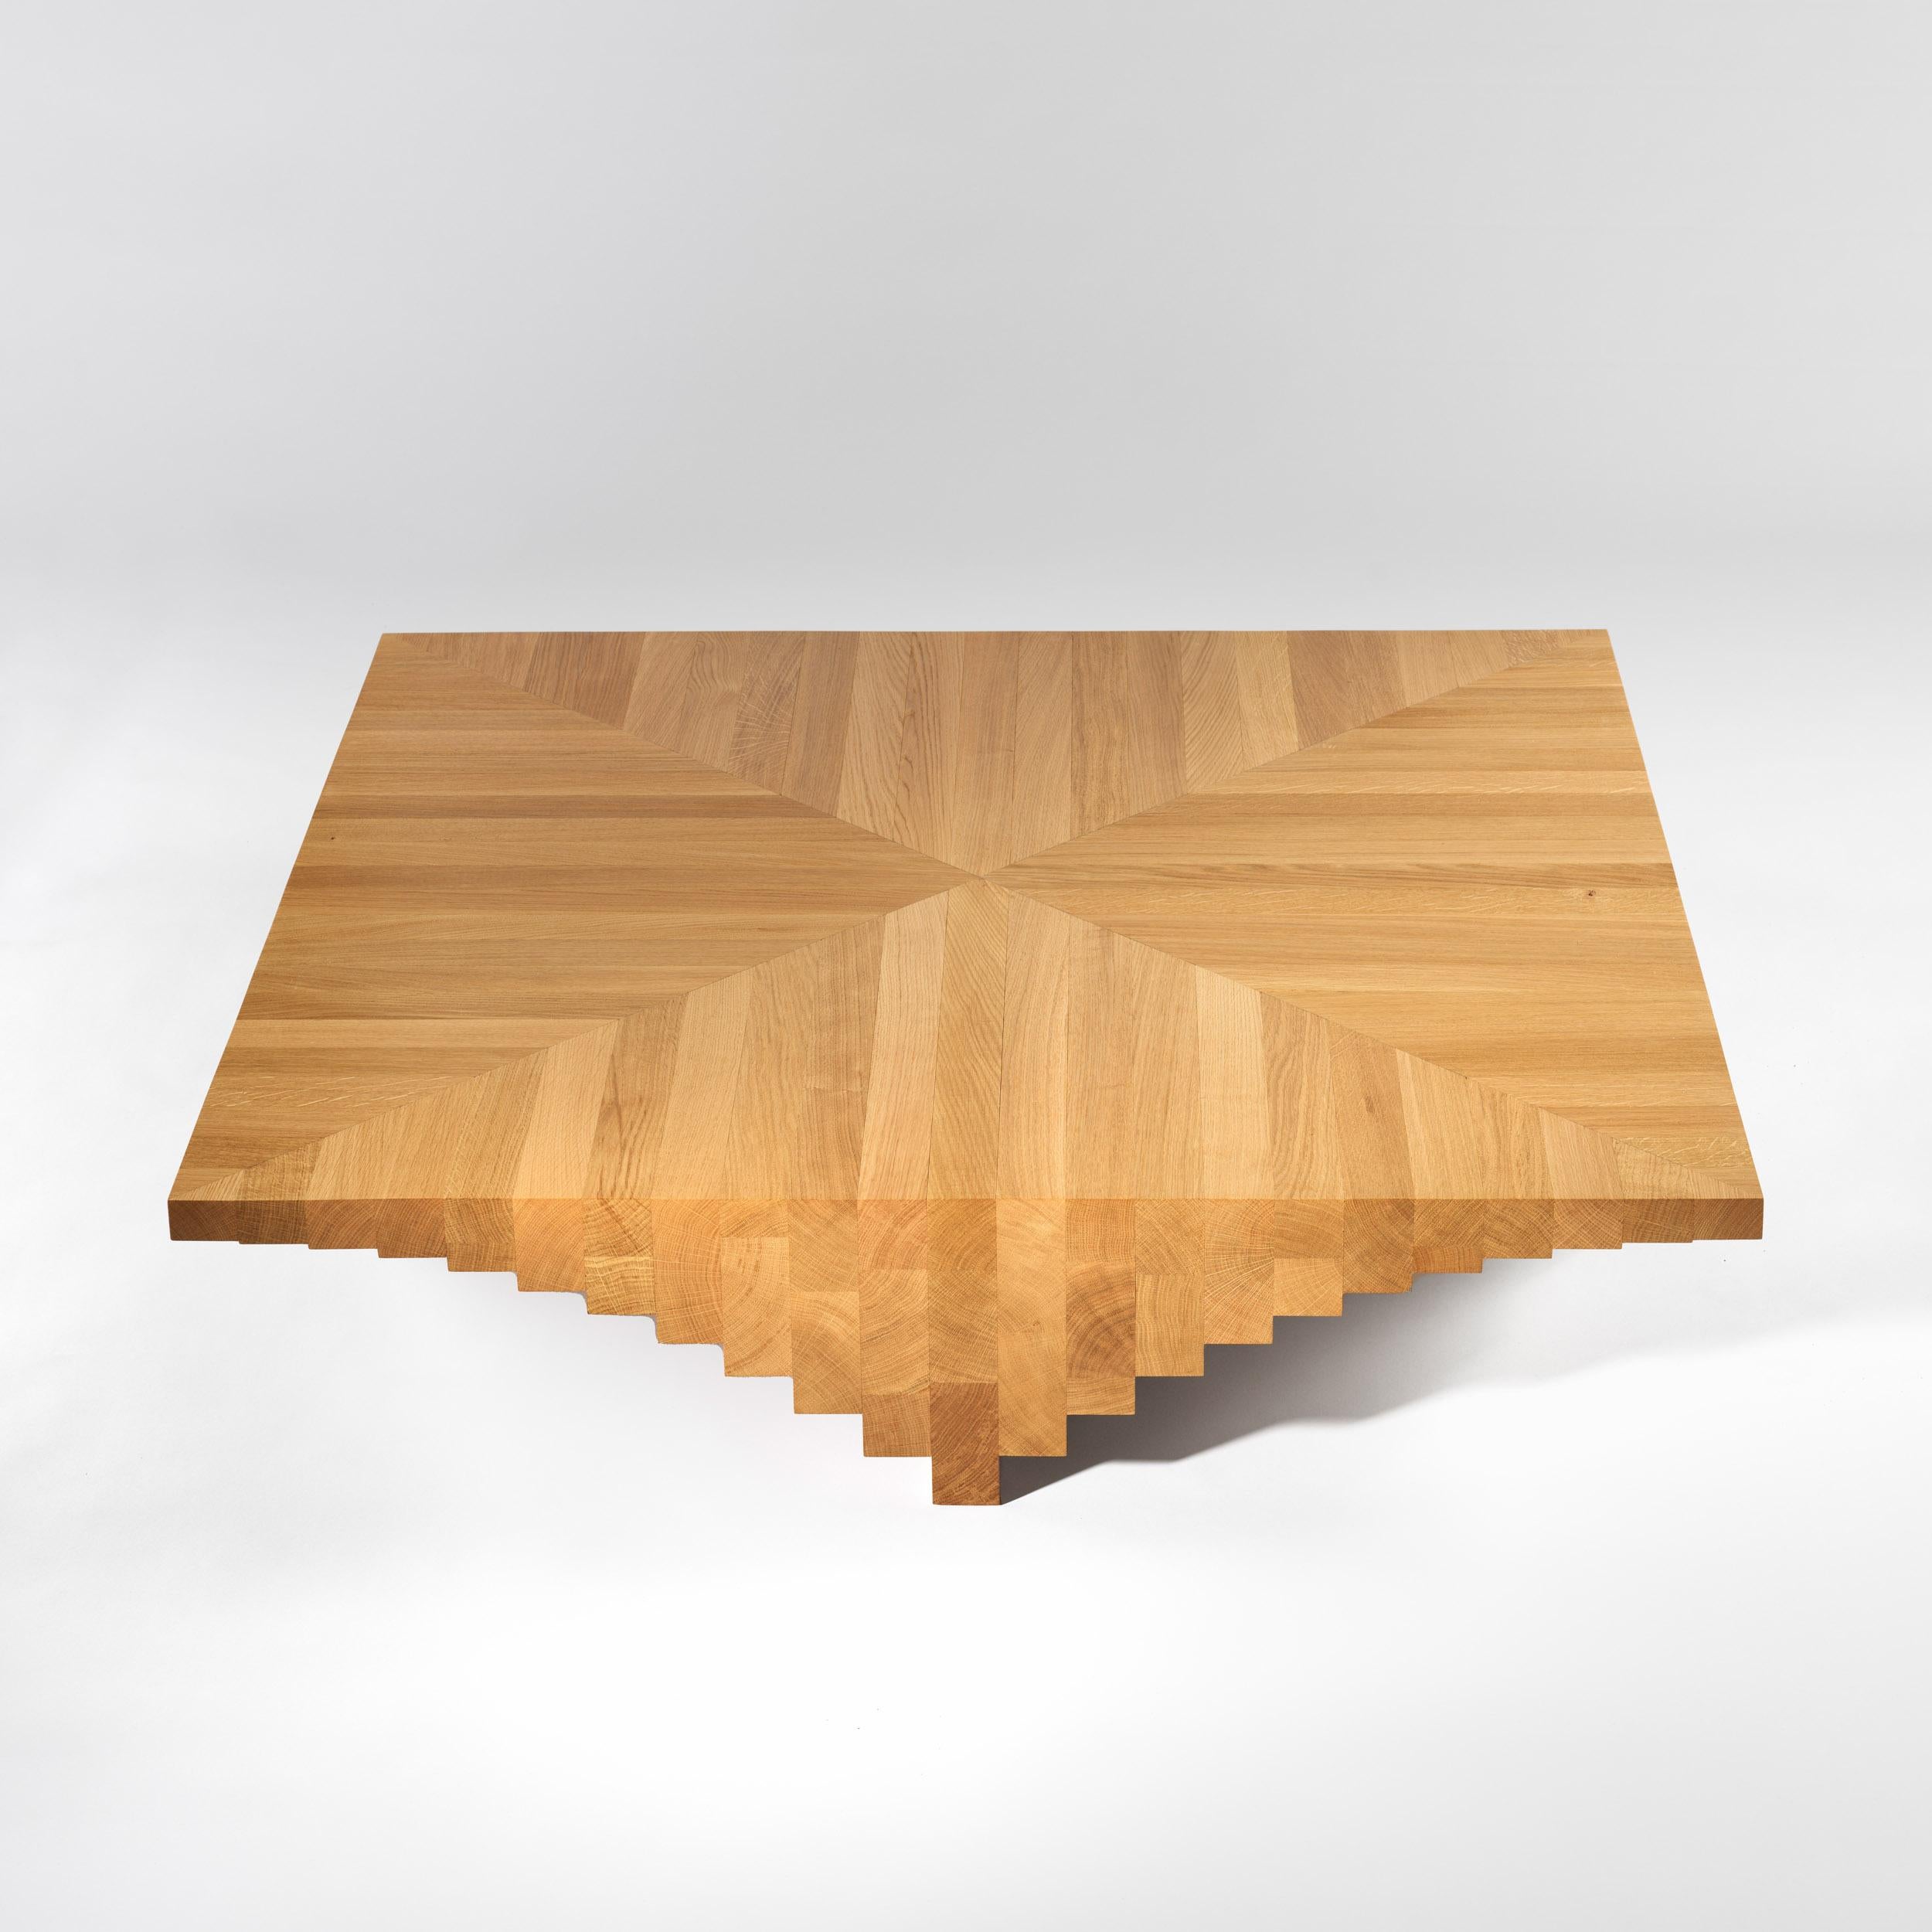 Brown solid oak ater coffee table by Tim Vranken For Sale 2